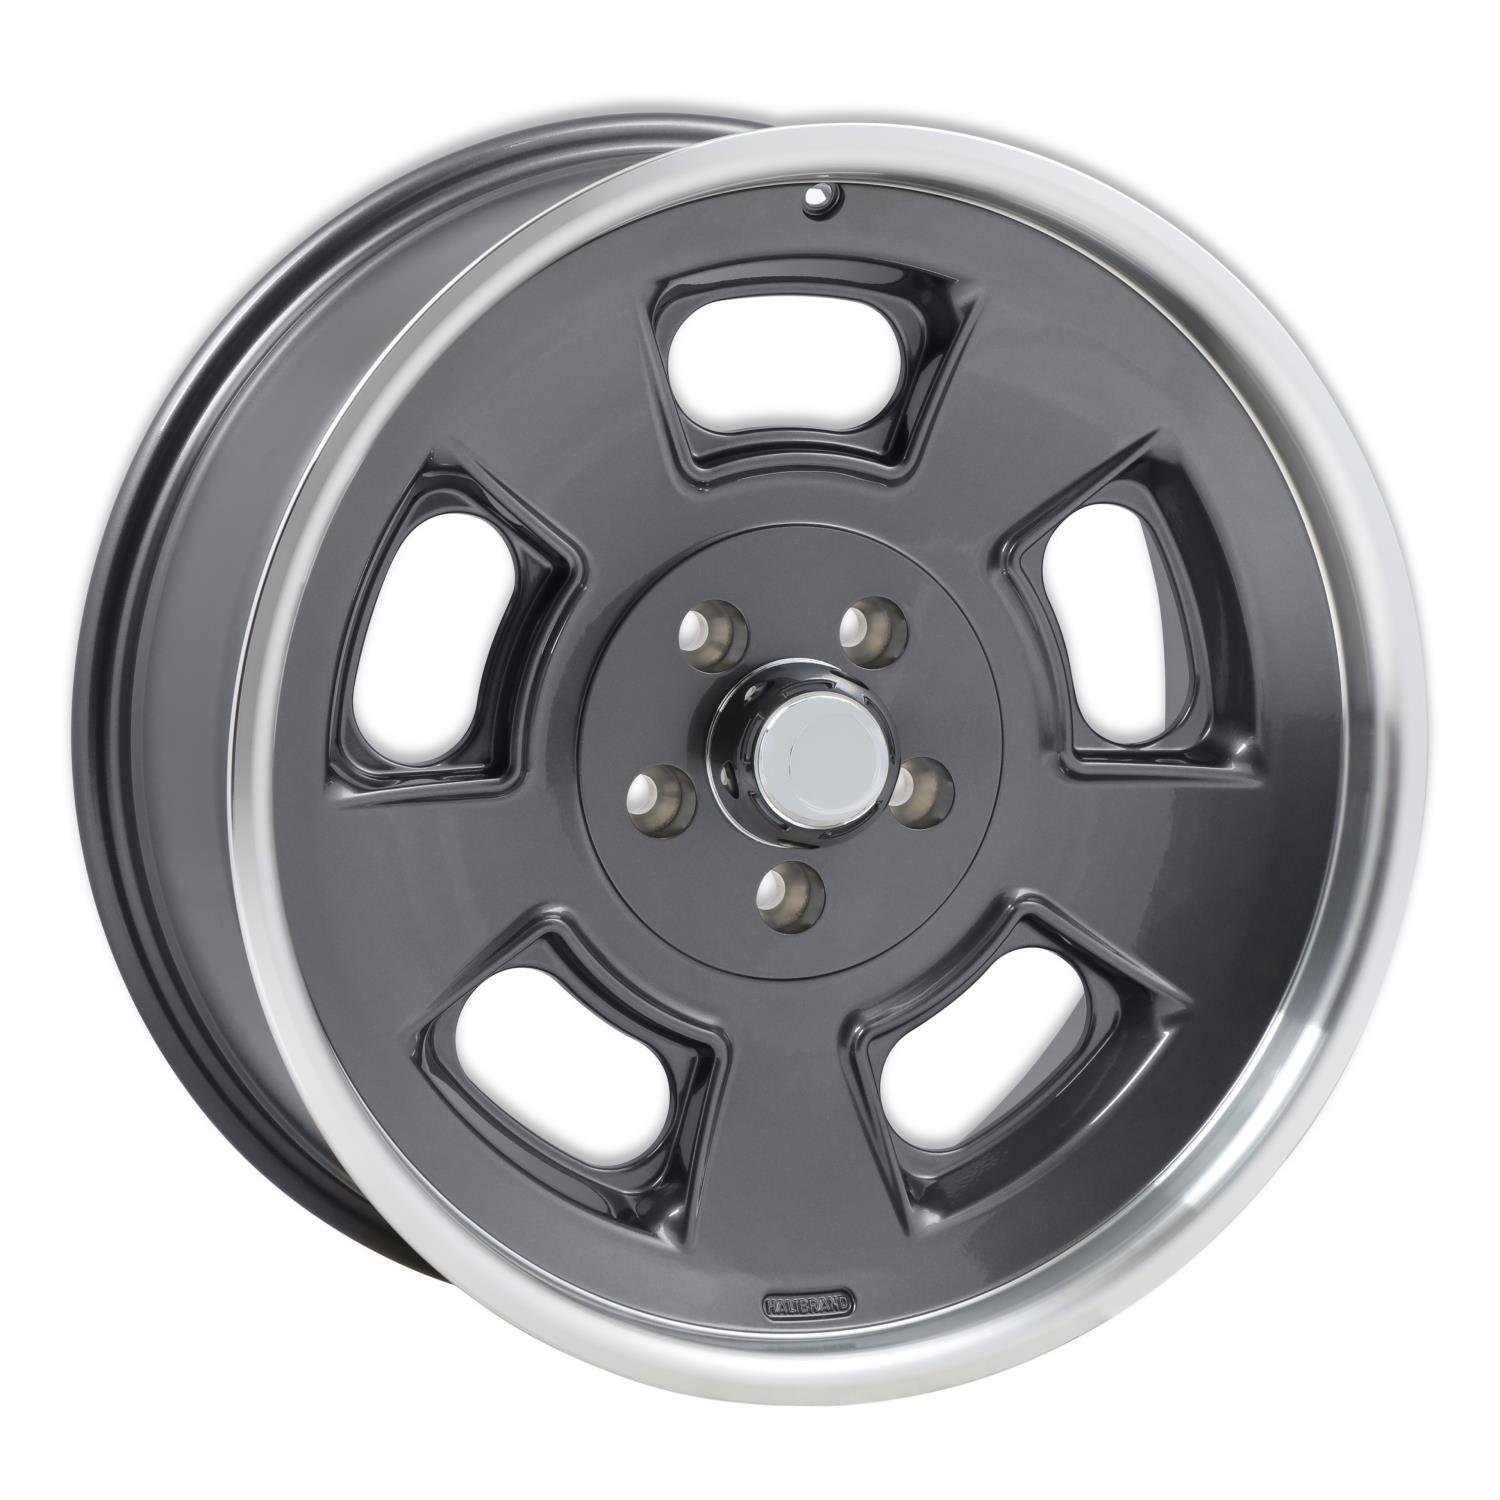 Sprint Front Wheel, Size: 20x8.5", Bolt Pattern: 5x5", Backspace: 5.25" [Anthracite with Machined Lip - Gloss Clearcoat]